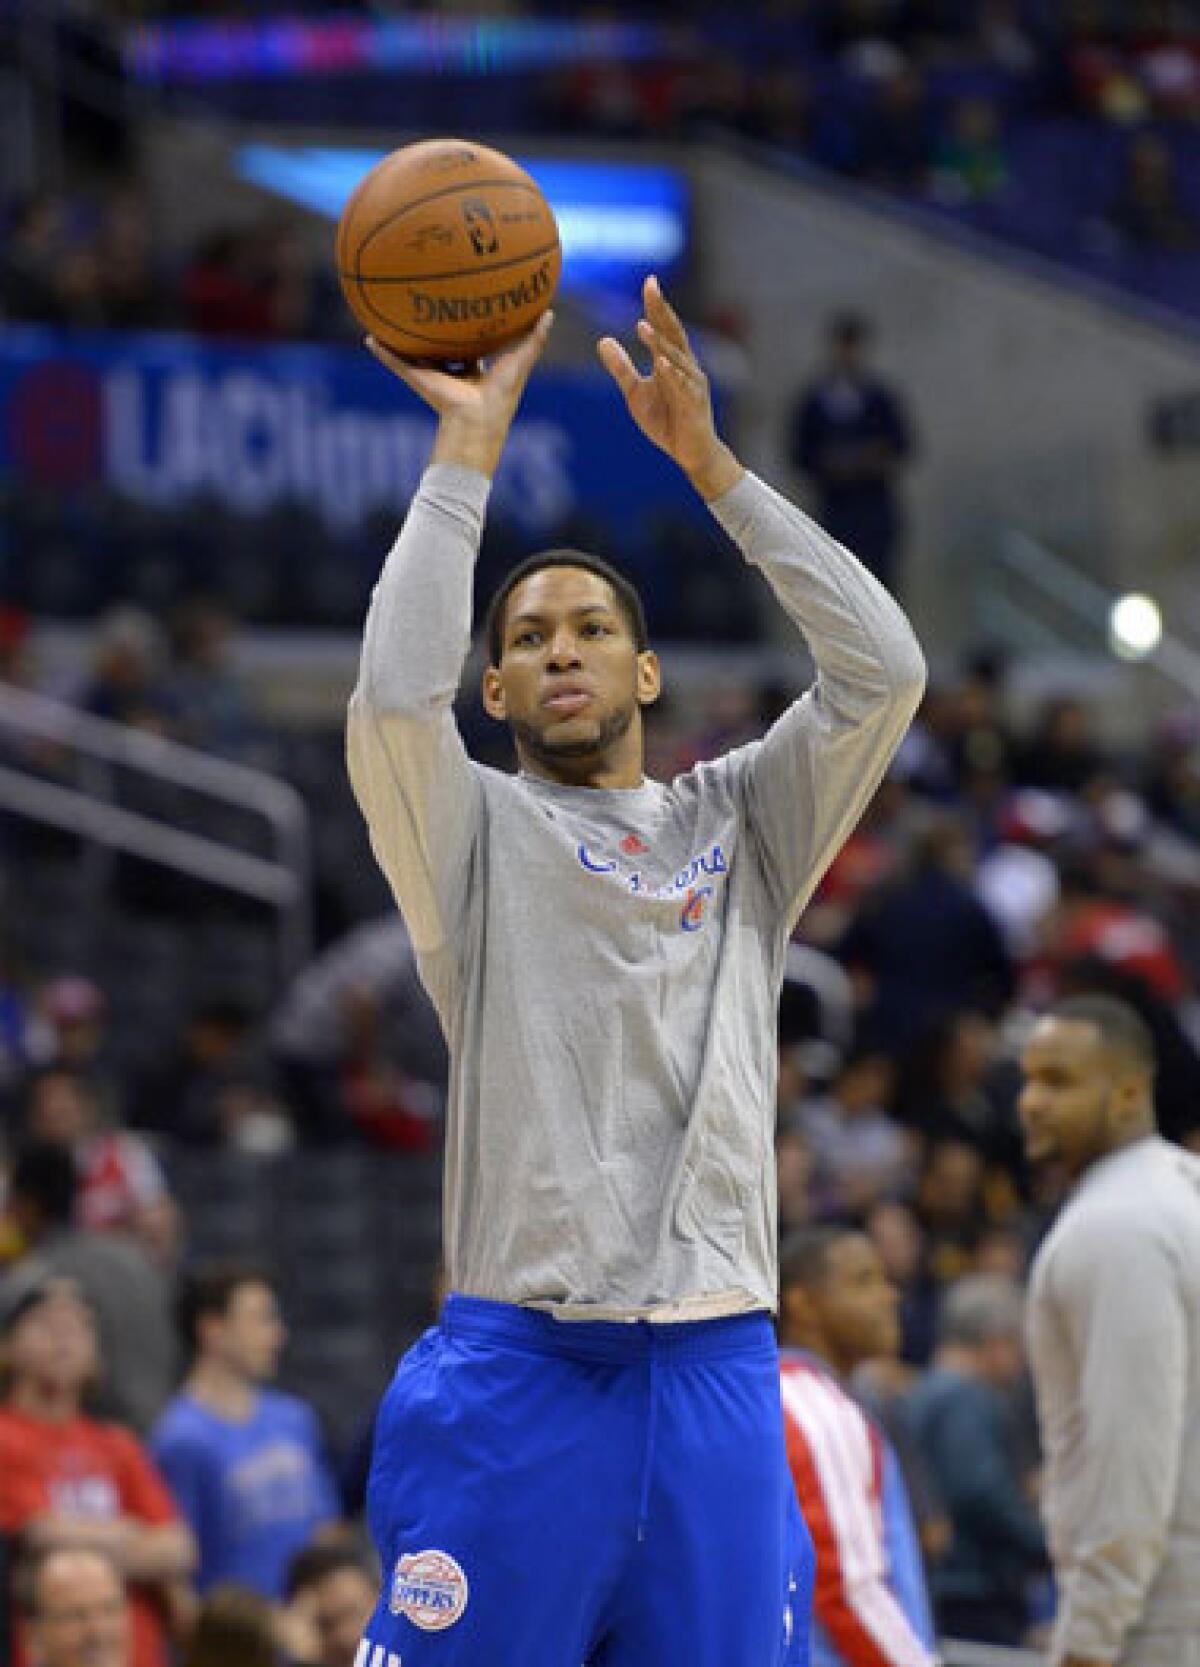 Danny Granger during practice with the Clippers on Saturday.